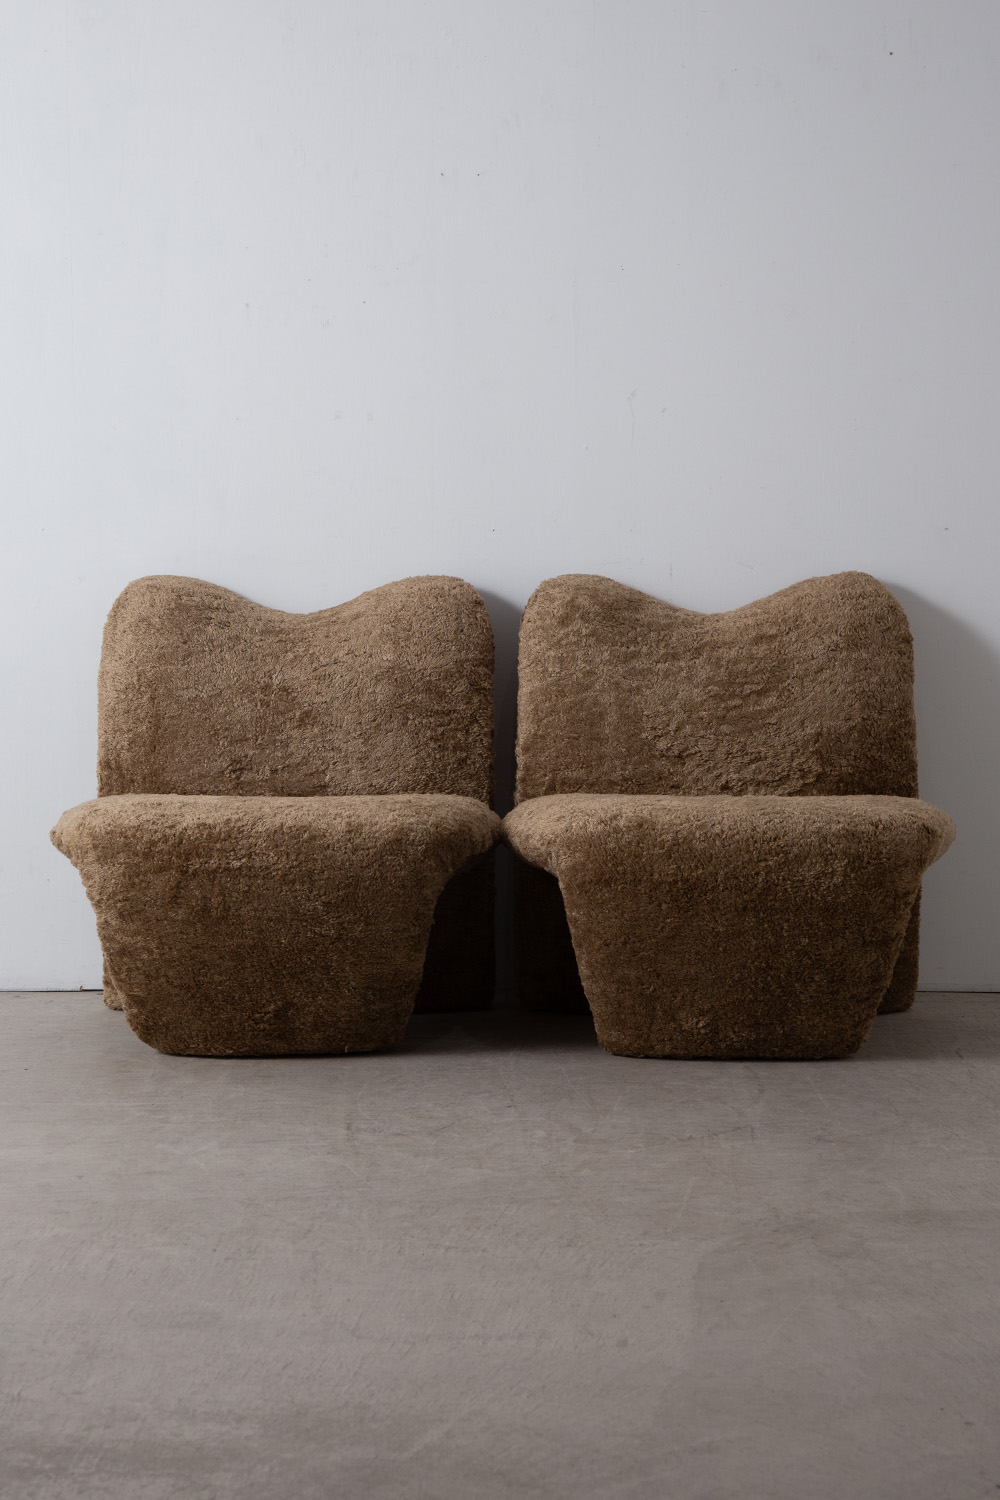 Kron Multipla Lounge Chair by Jane Dillon and Peter Wheeler